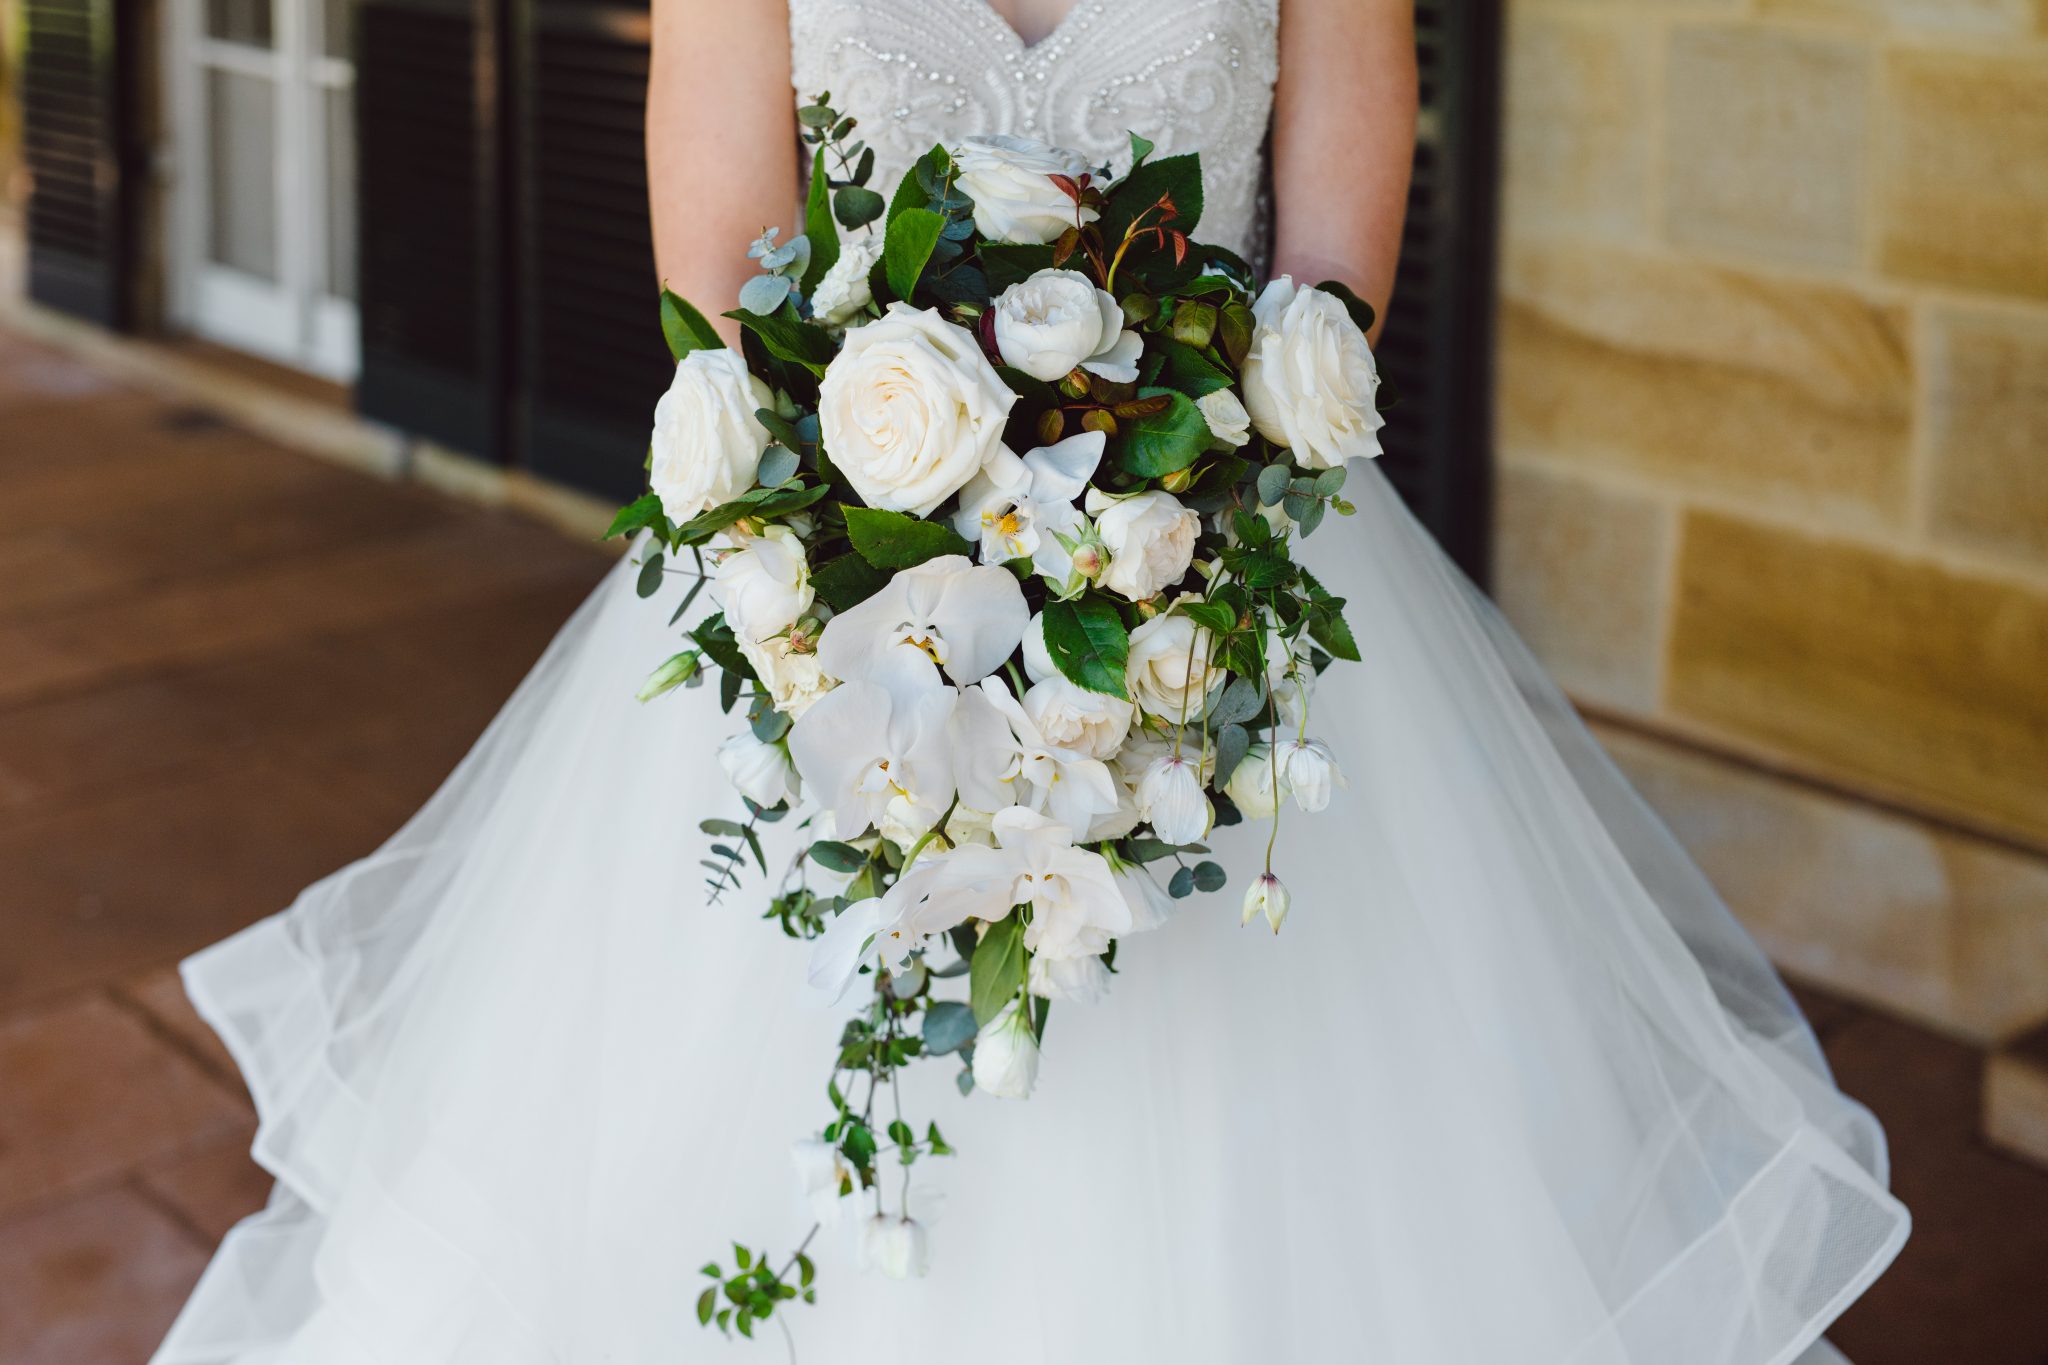 The Bridal Bouquet - Decorations by Jelena